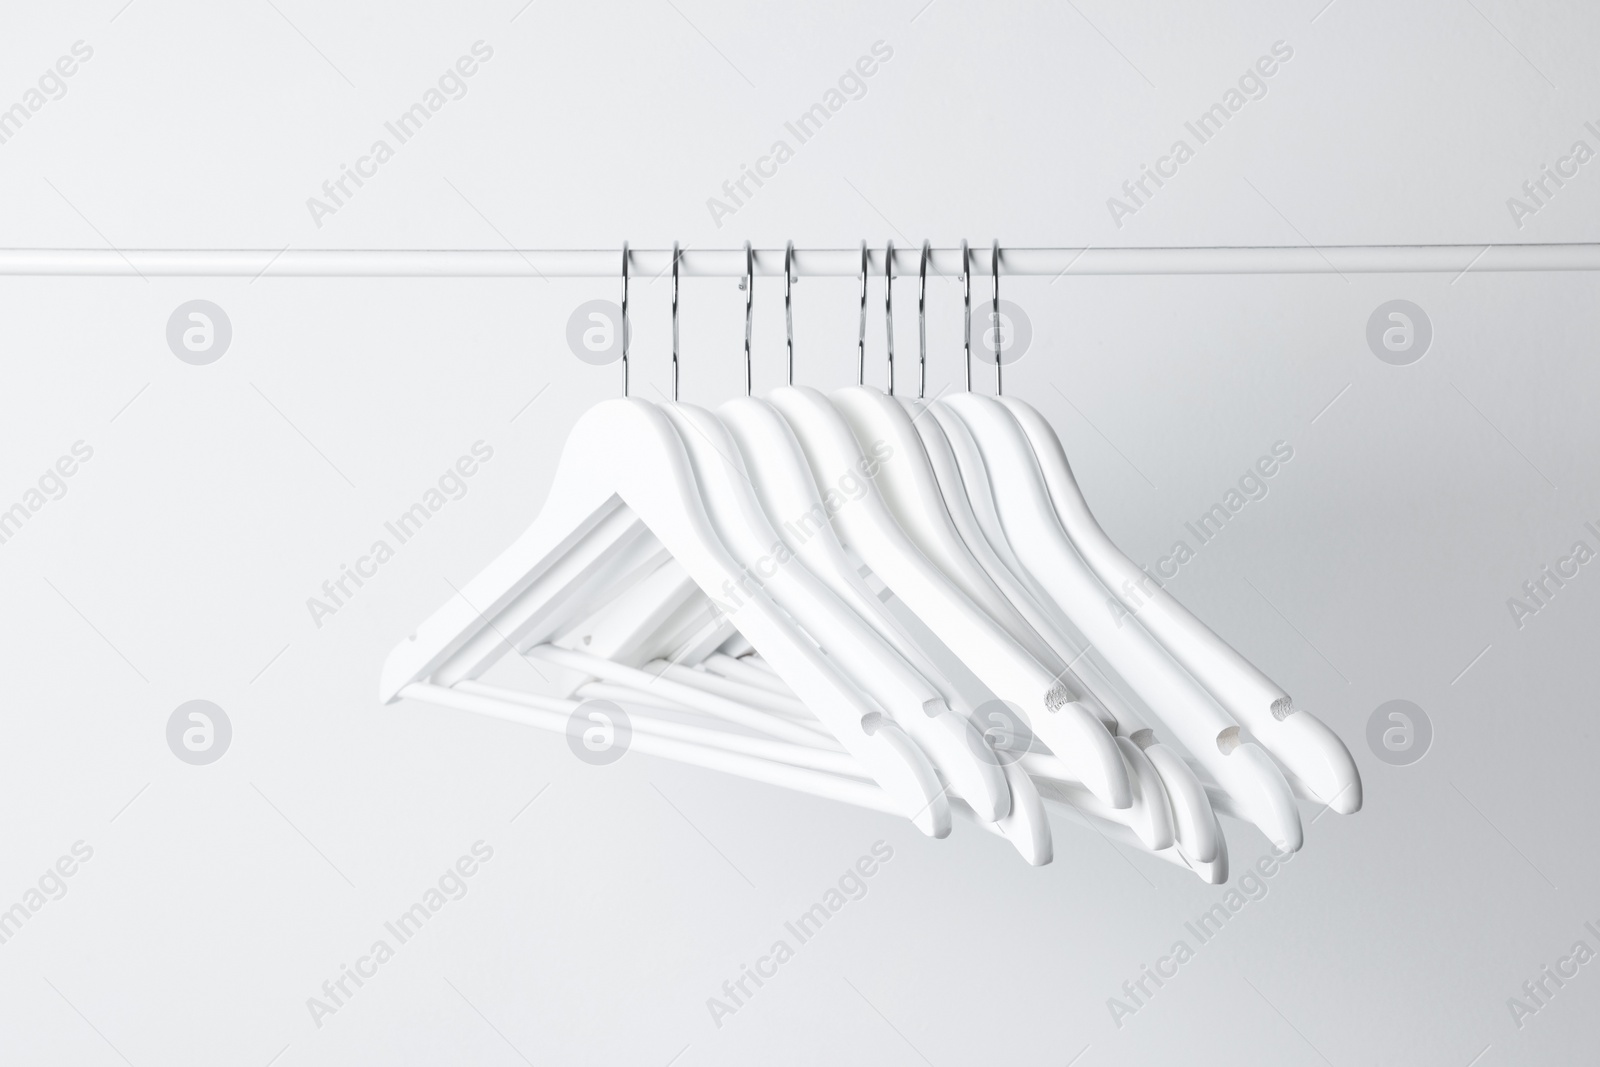 Photo of White clothes hangers on metal rail against light background